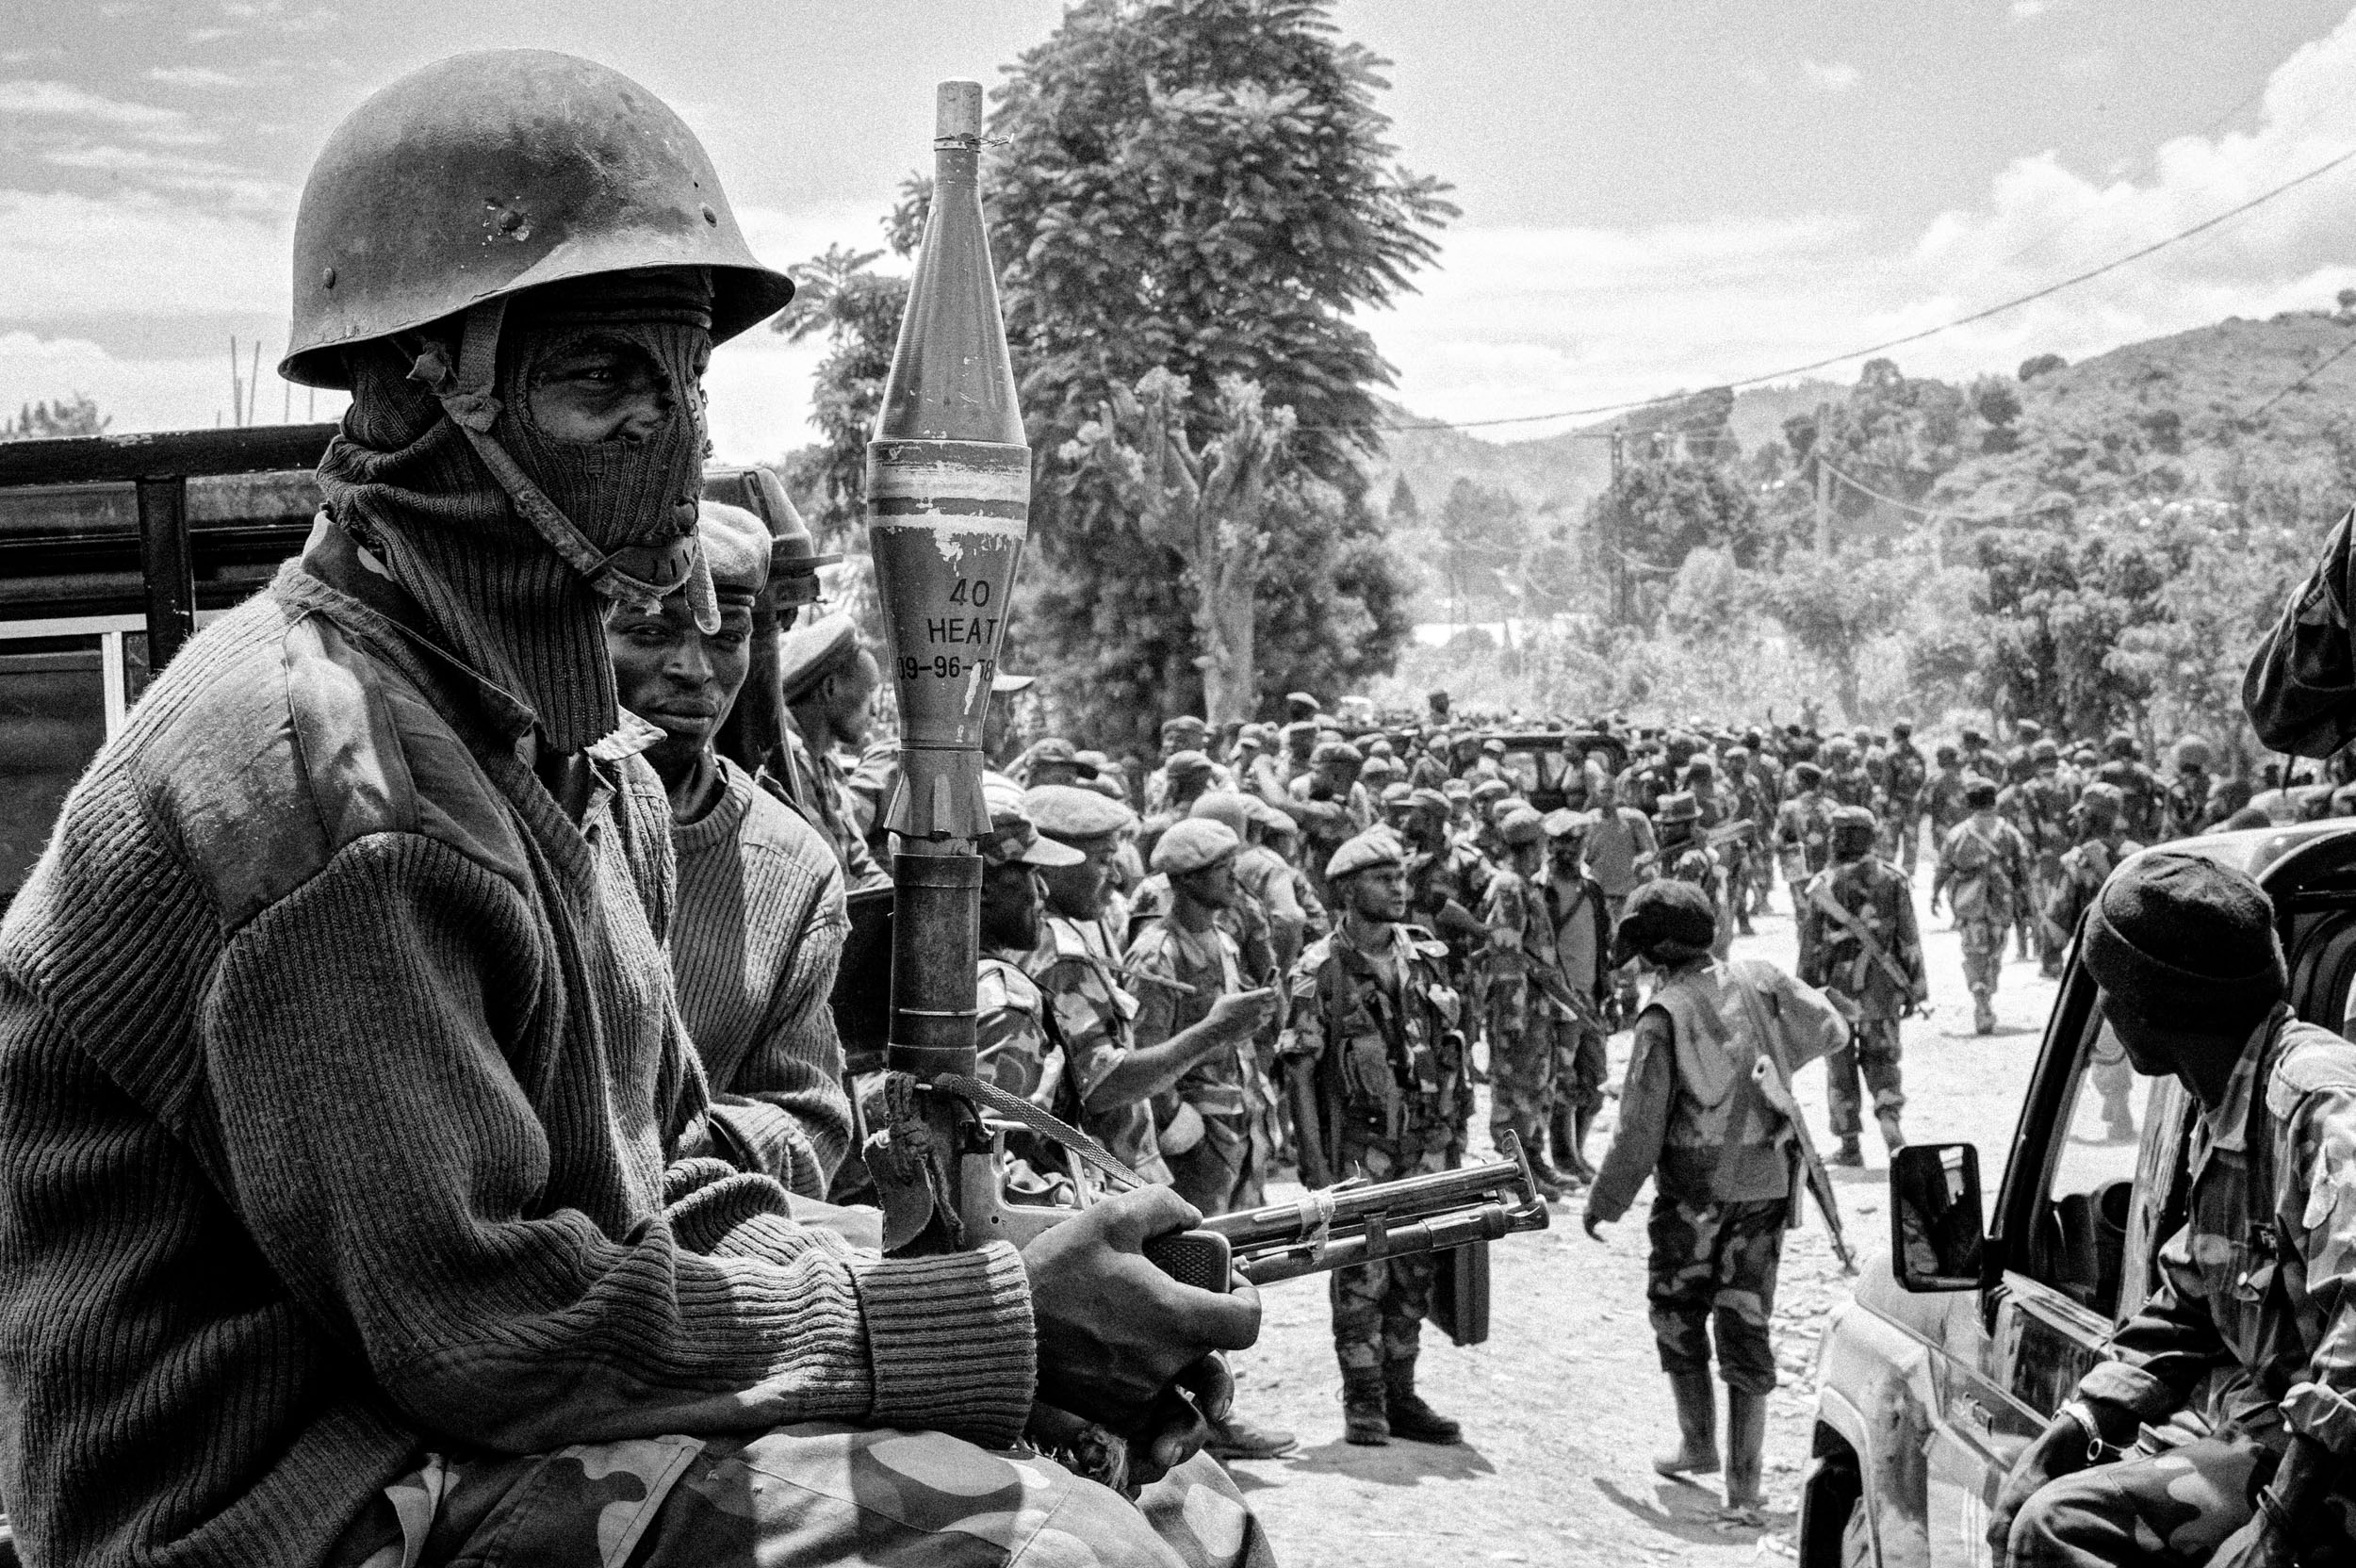  Troops from the recently retreated Armed Forces of the Democratic Republic of the Congo wait for a rally led by General Francois Olenga, who flew in a helicopter from Kinshasha to lift the moral of his recently retreated troops. 